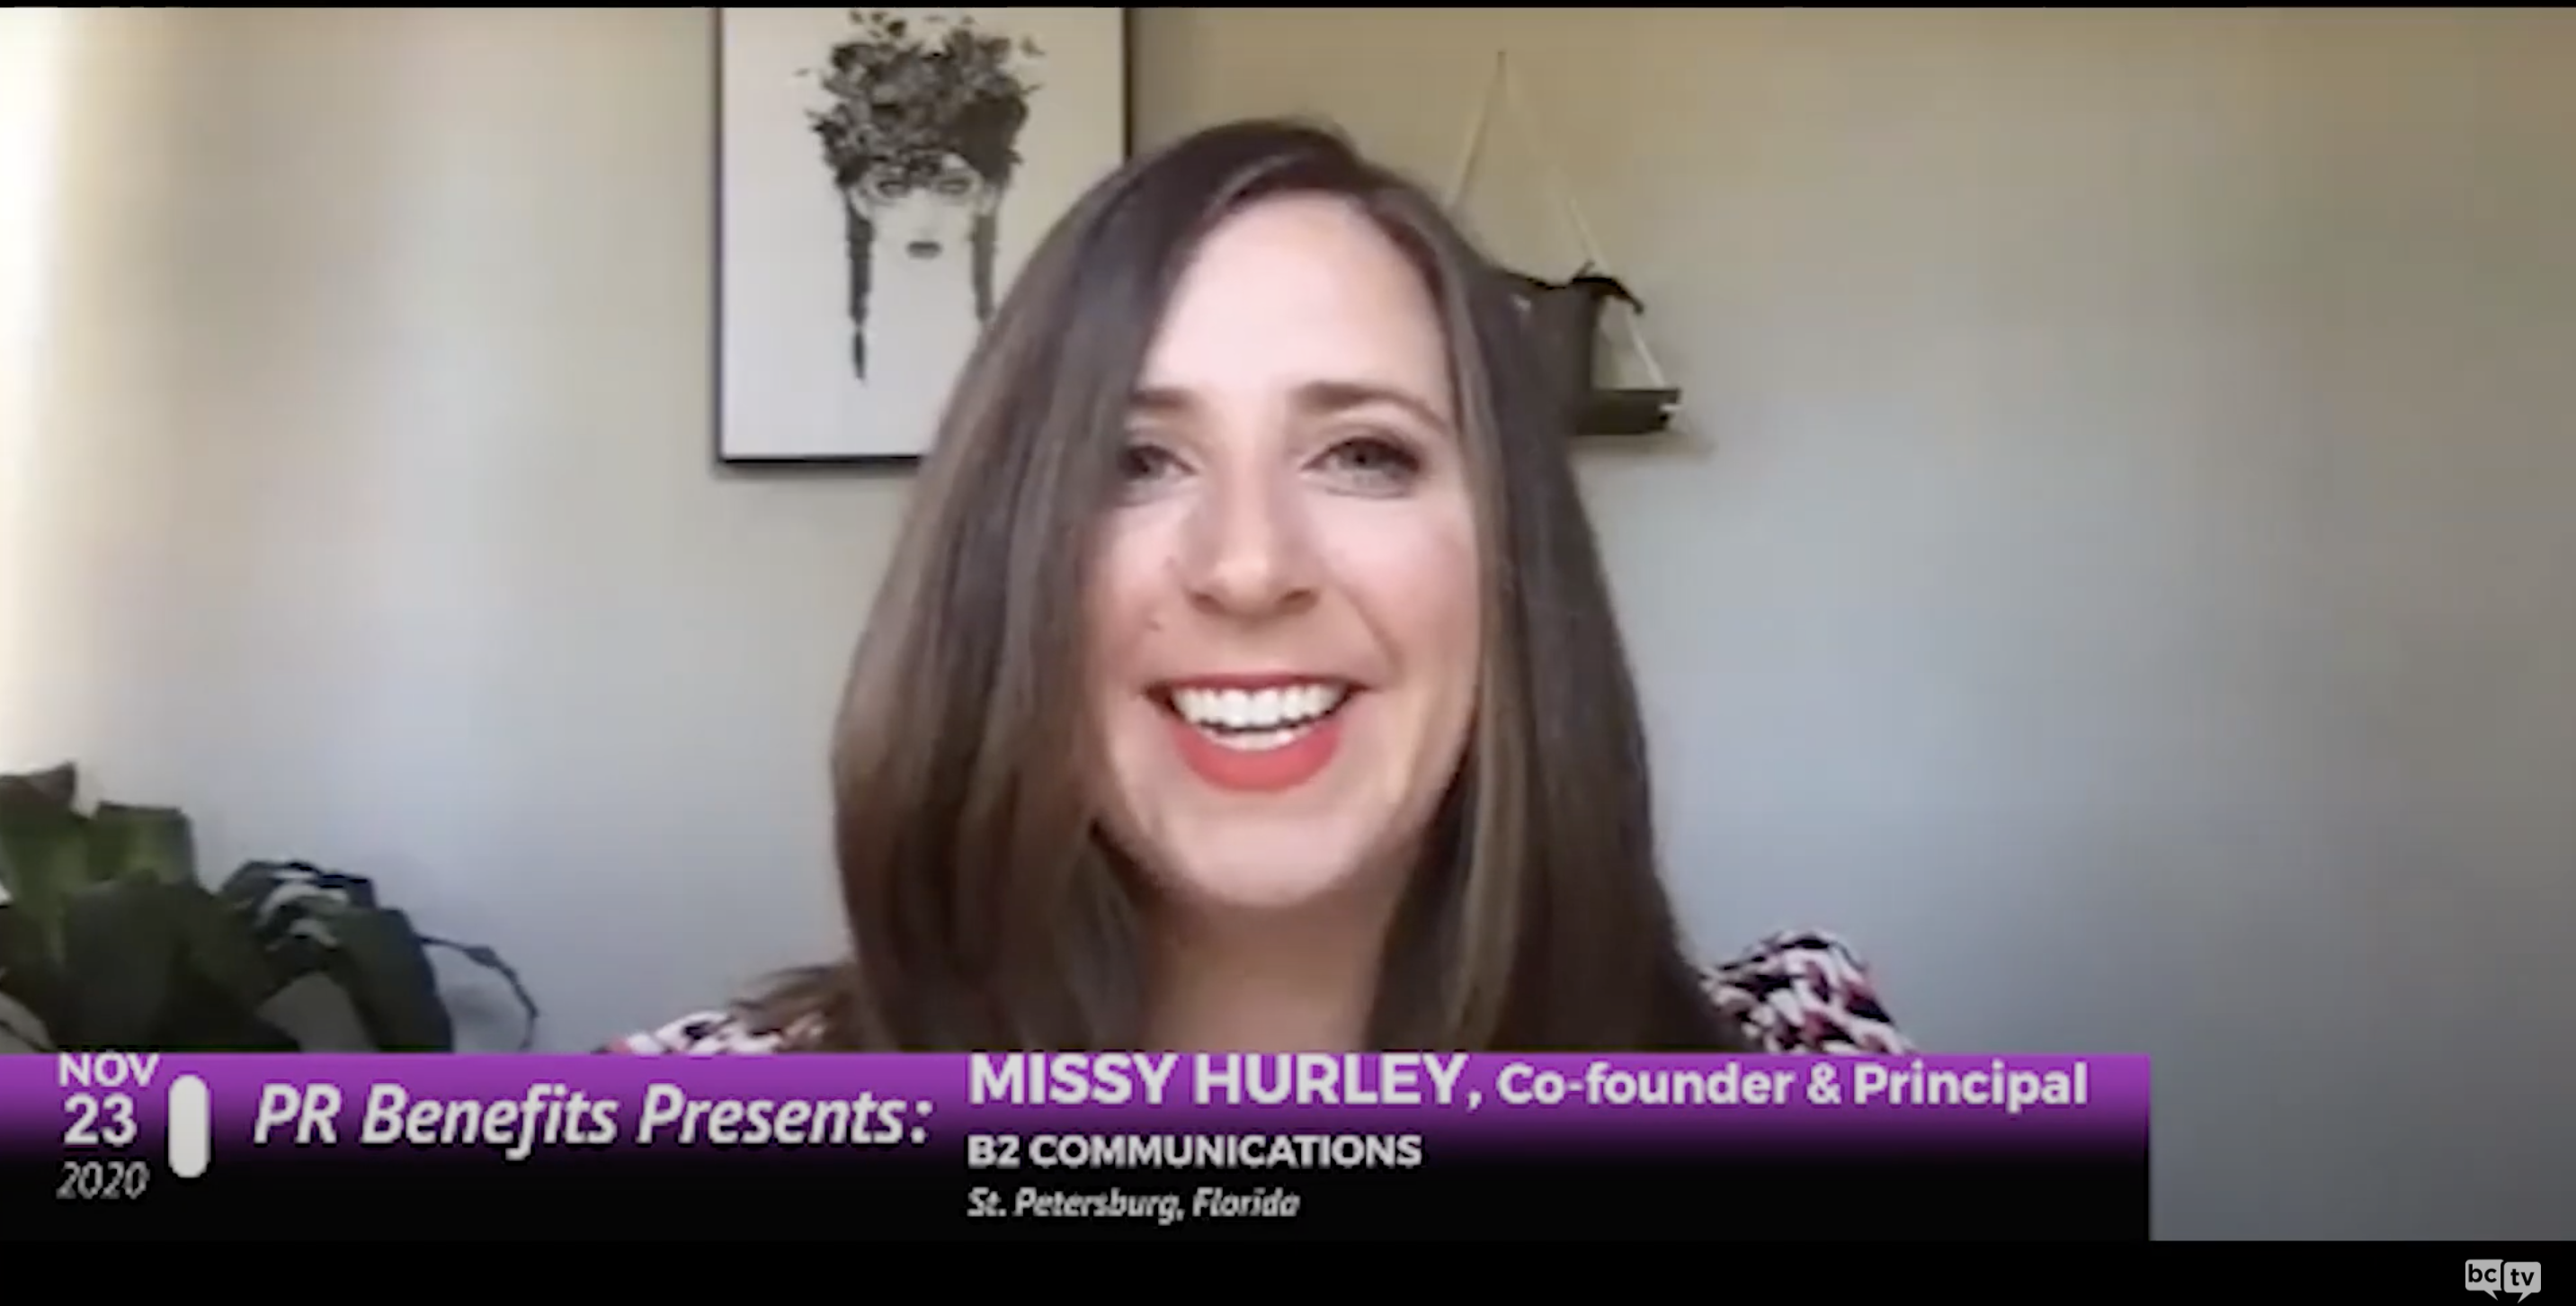 Co-founder Missy Hurley appears on “PR Benefits” show